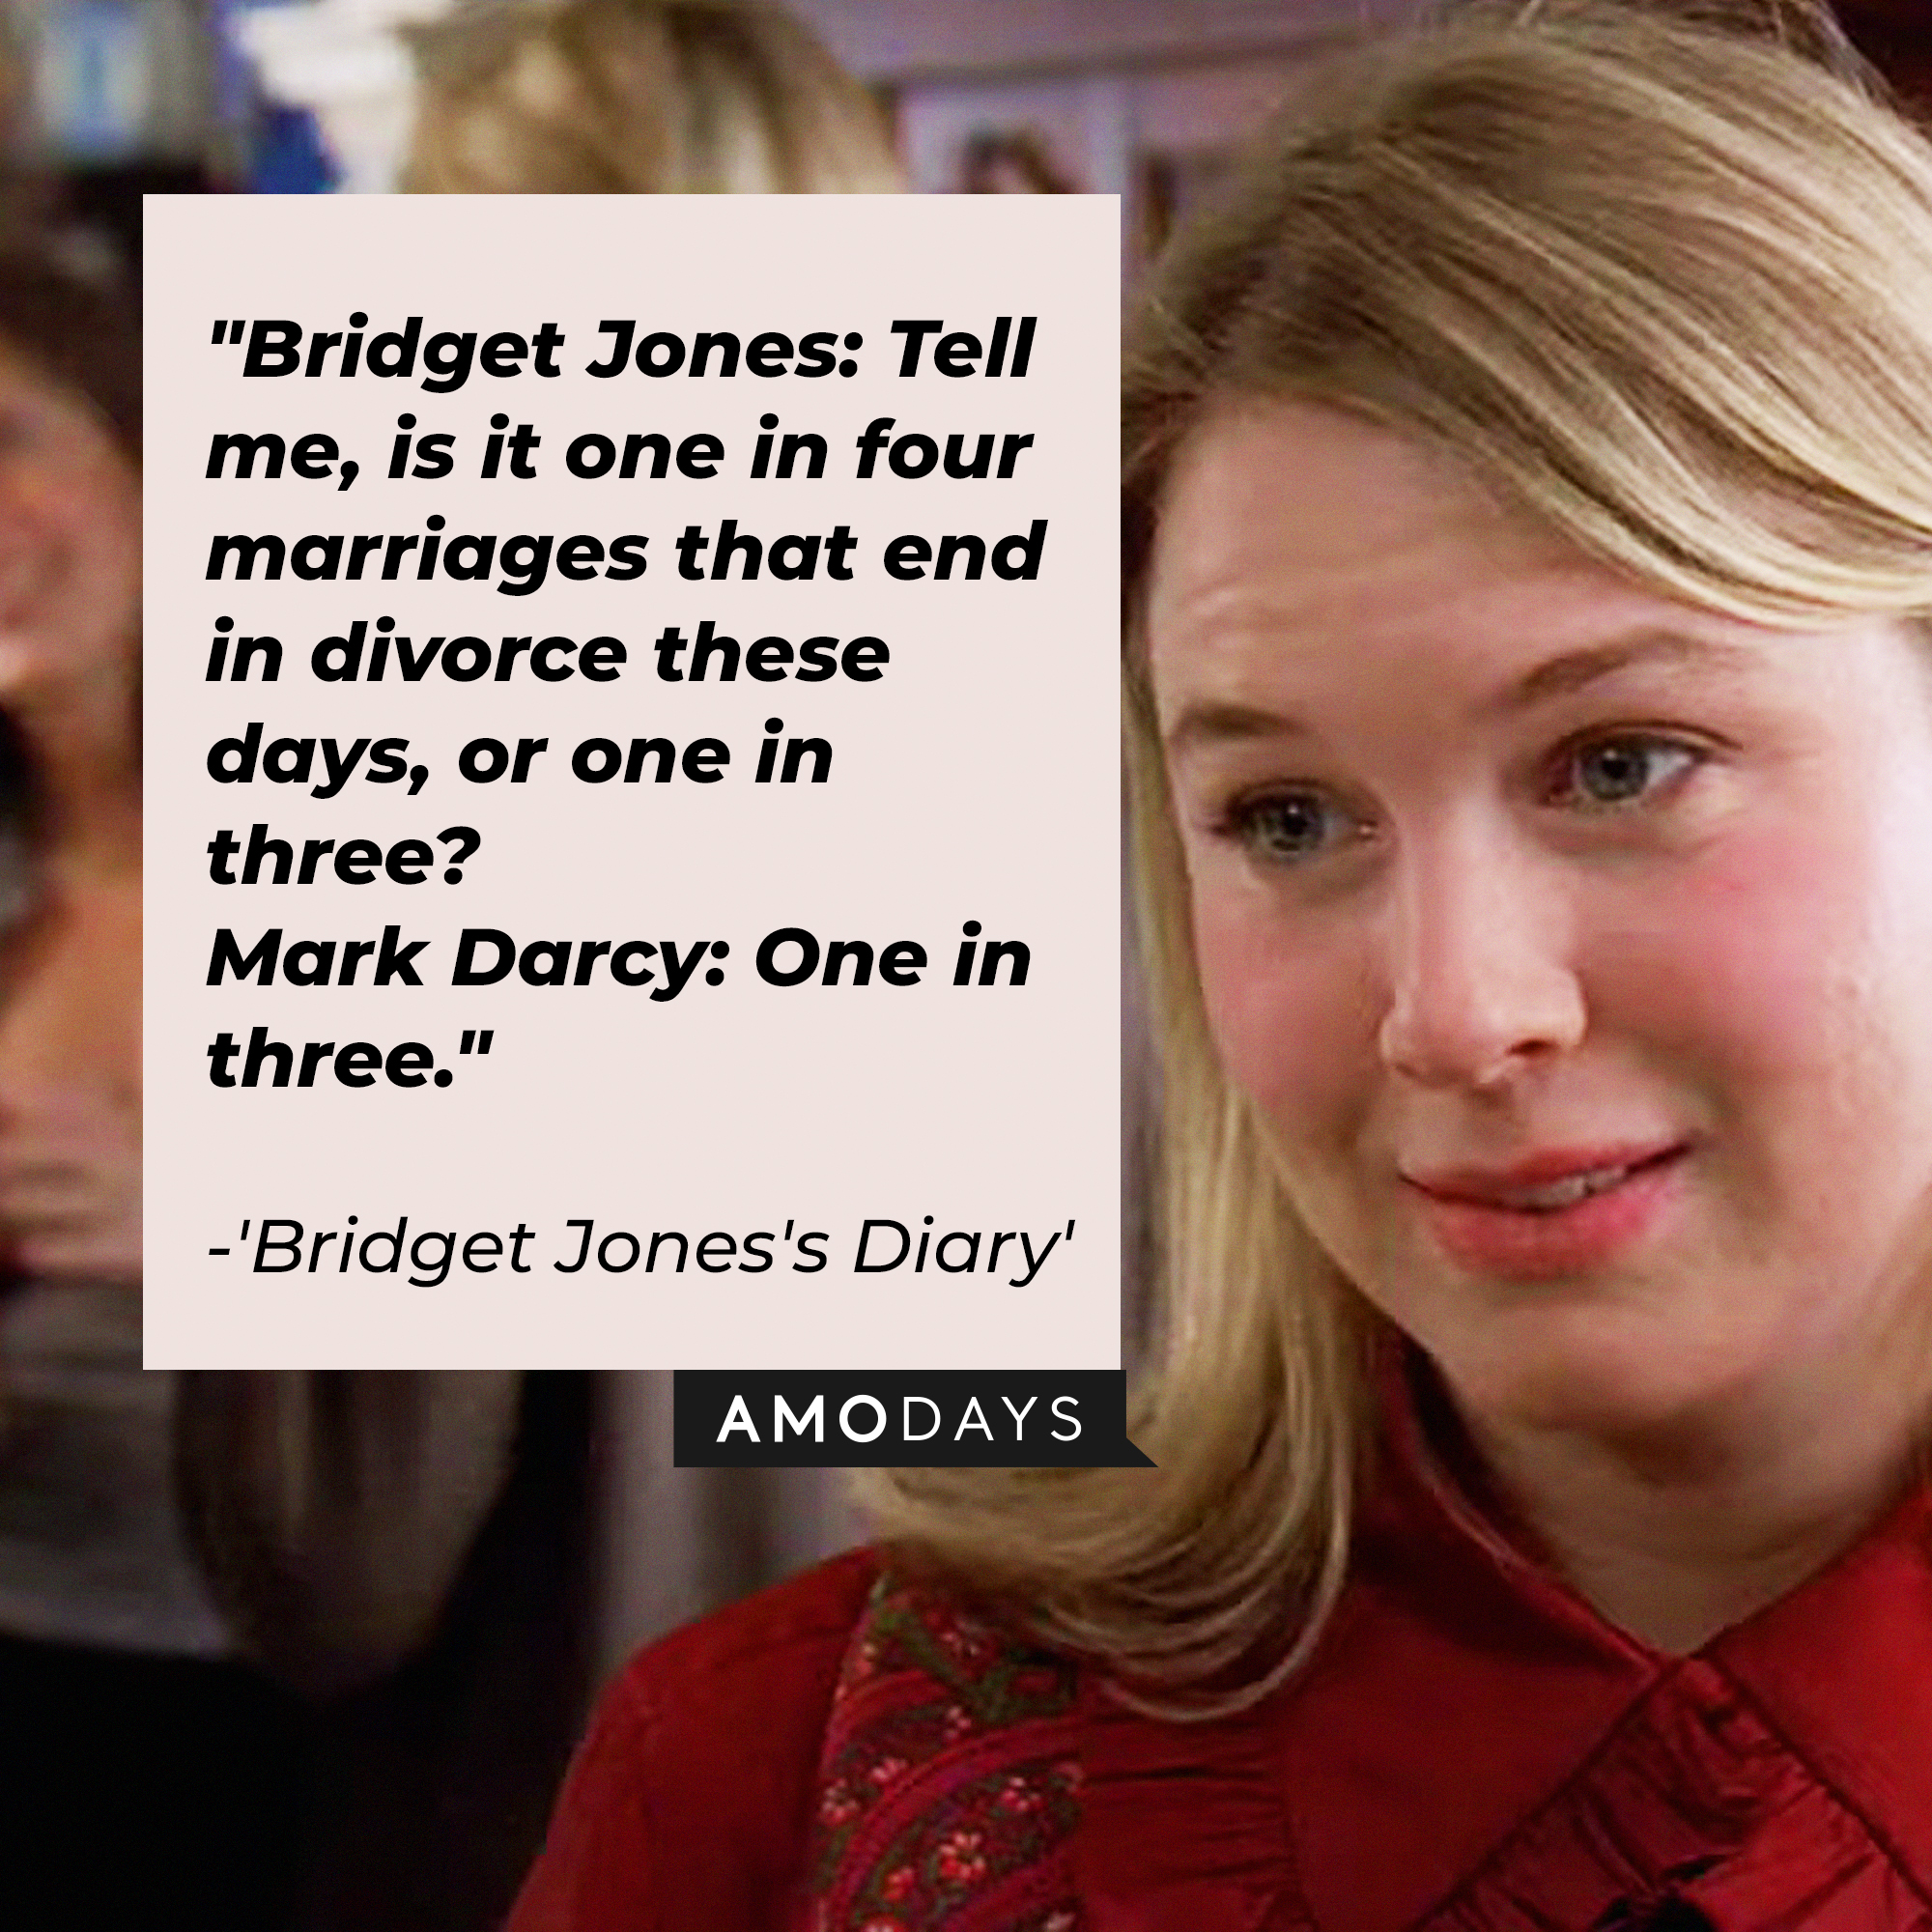 Bridget Jones with her quote in "Bridget Jones's Diary:" "Bridget Jones: Tell me, is it one in four marriages that end in divorce these days, or one in three? ; Mark Darcy: One in three." | Source: Facebook/BridgetJonessDiary